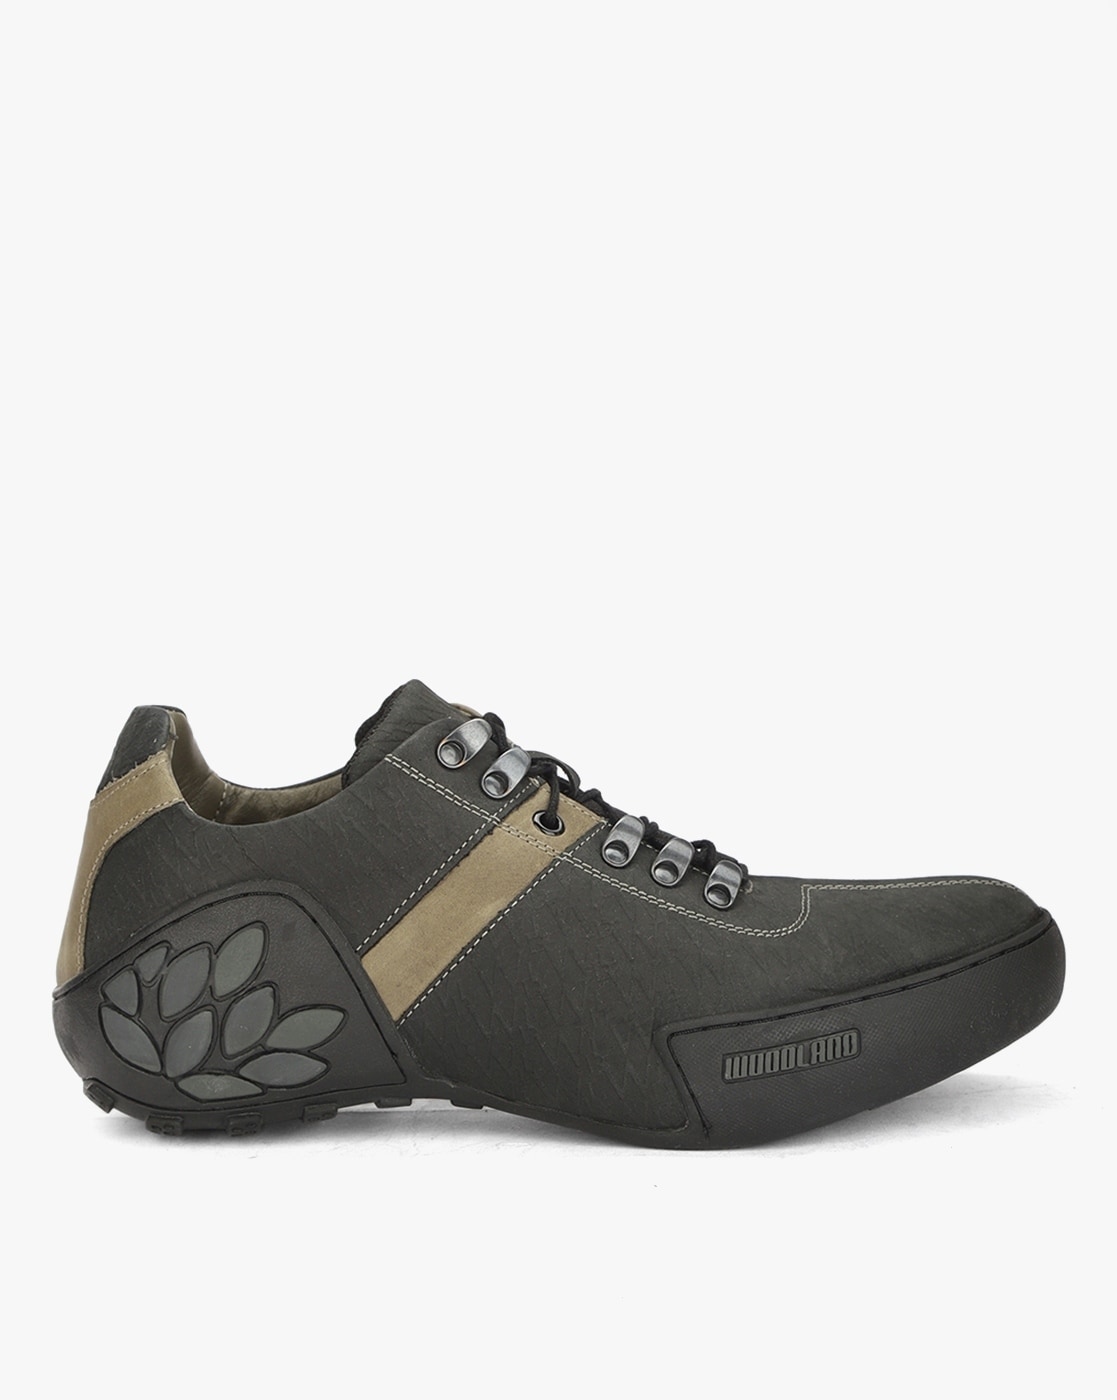 Buy Woodland Sports Shoes Online In India At Best Prices | Tata CLiQ